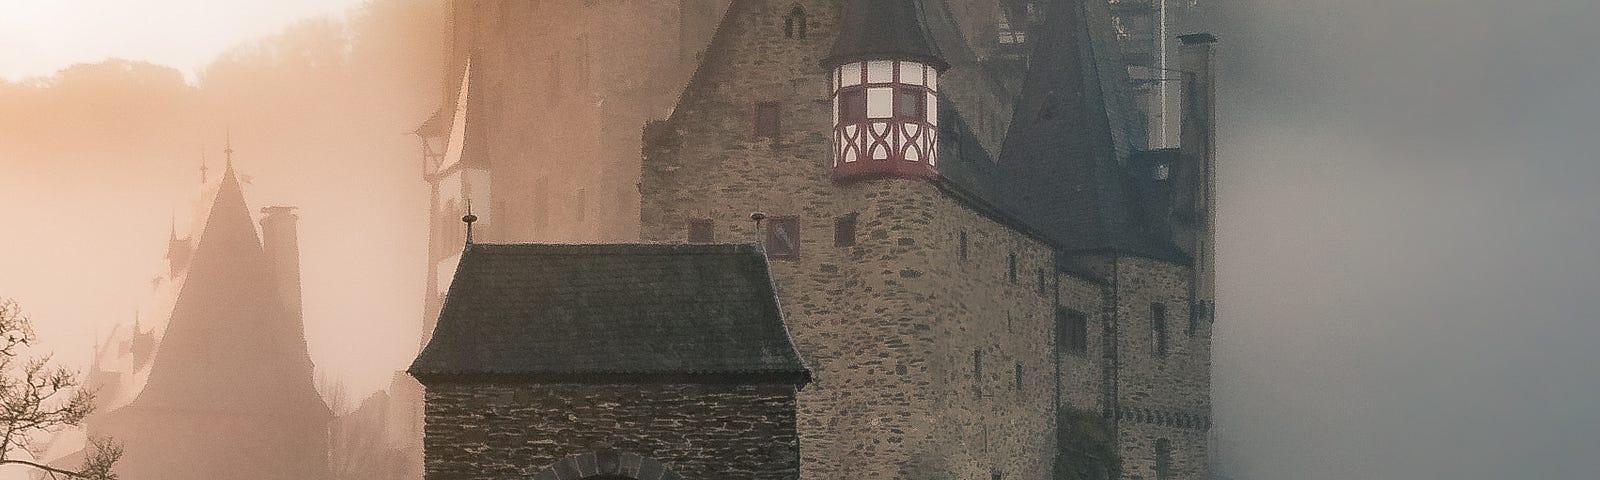 A medieval style castle facing a bridge, with a reflection of the same image in water